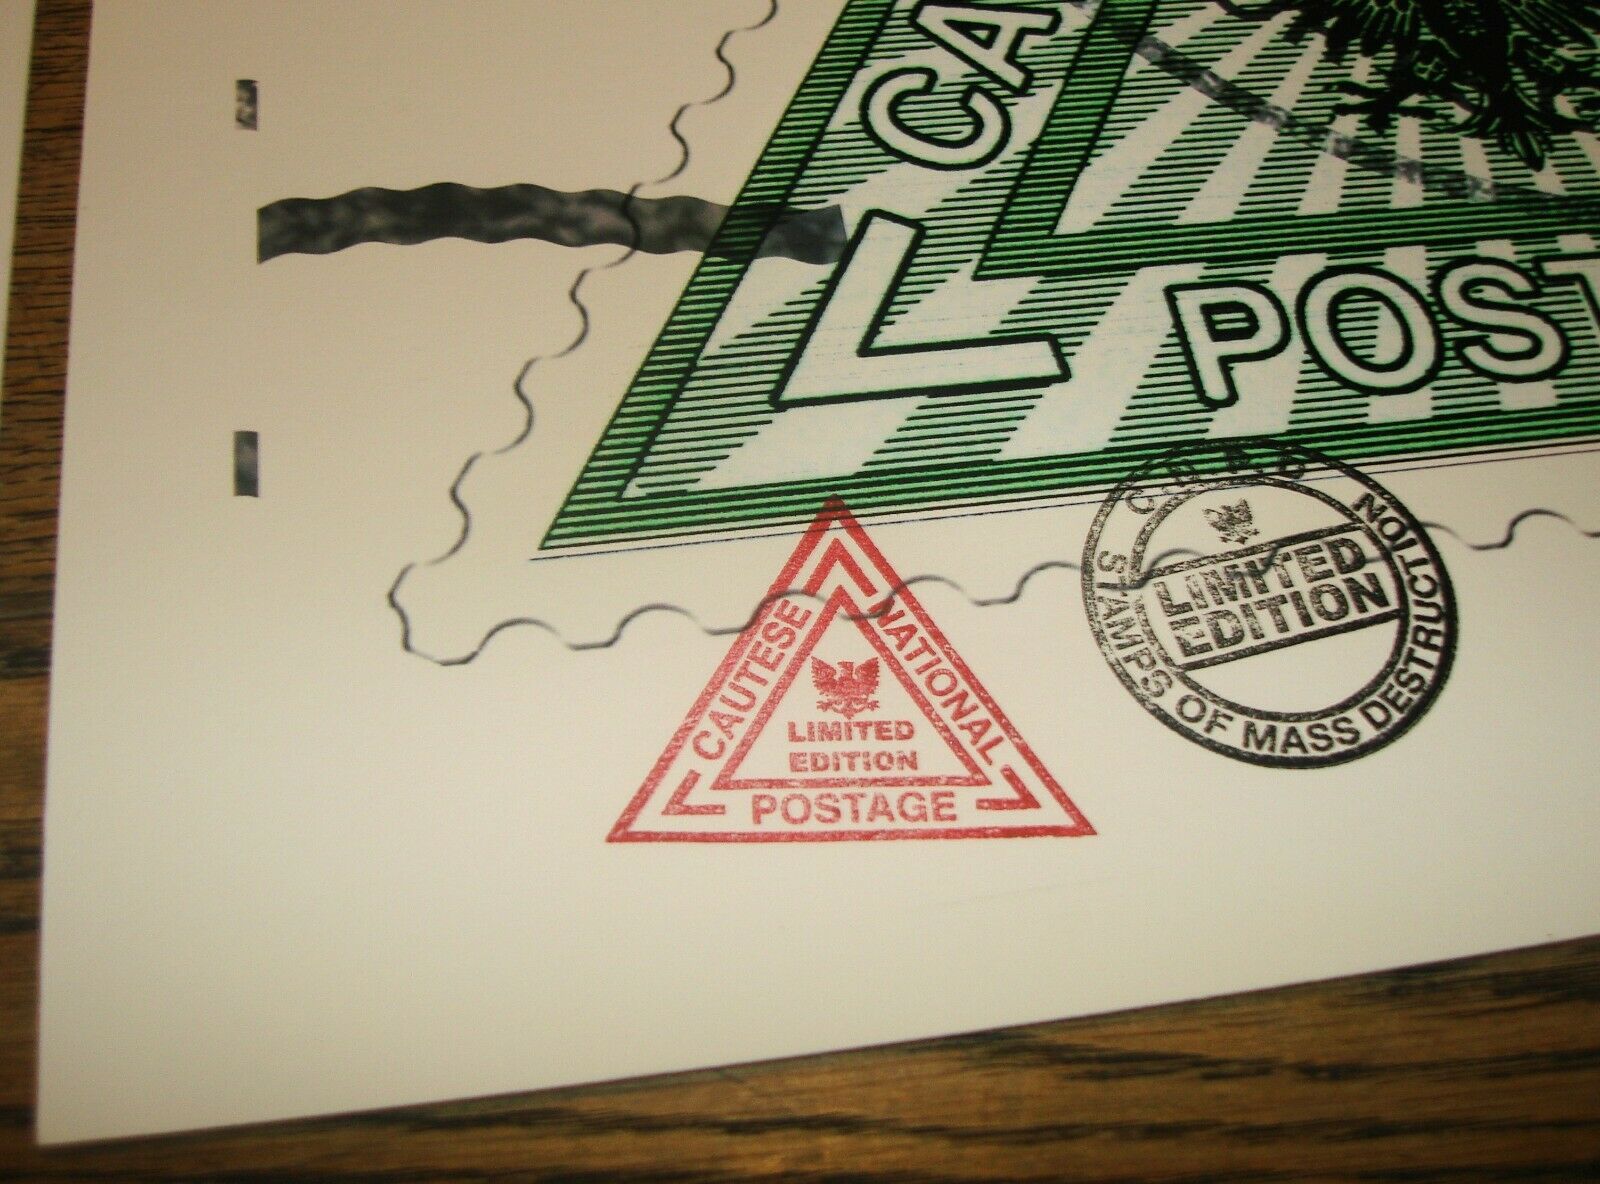 James Cauty (1956 - ) CNPD £2, £3 and £4 Triangle Stamps - Set of 3 Pop Editions COA (2005) - Image 10 of 13